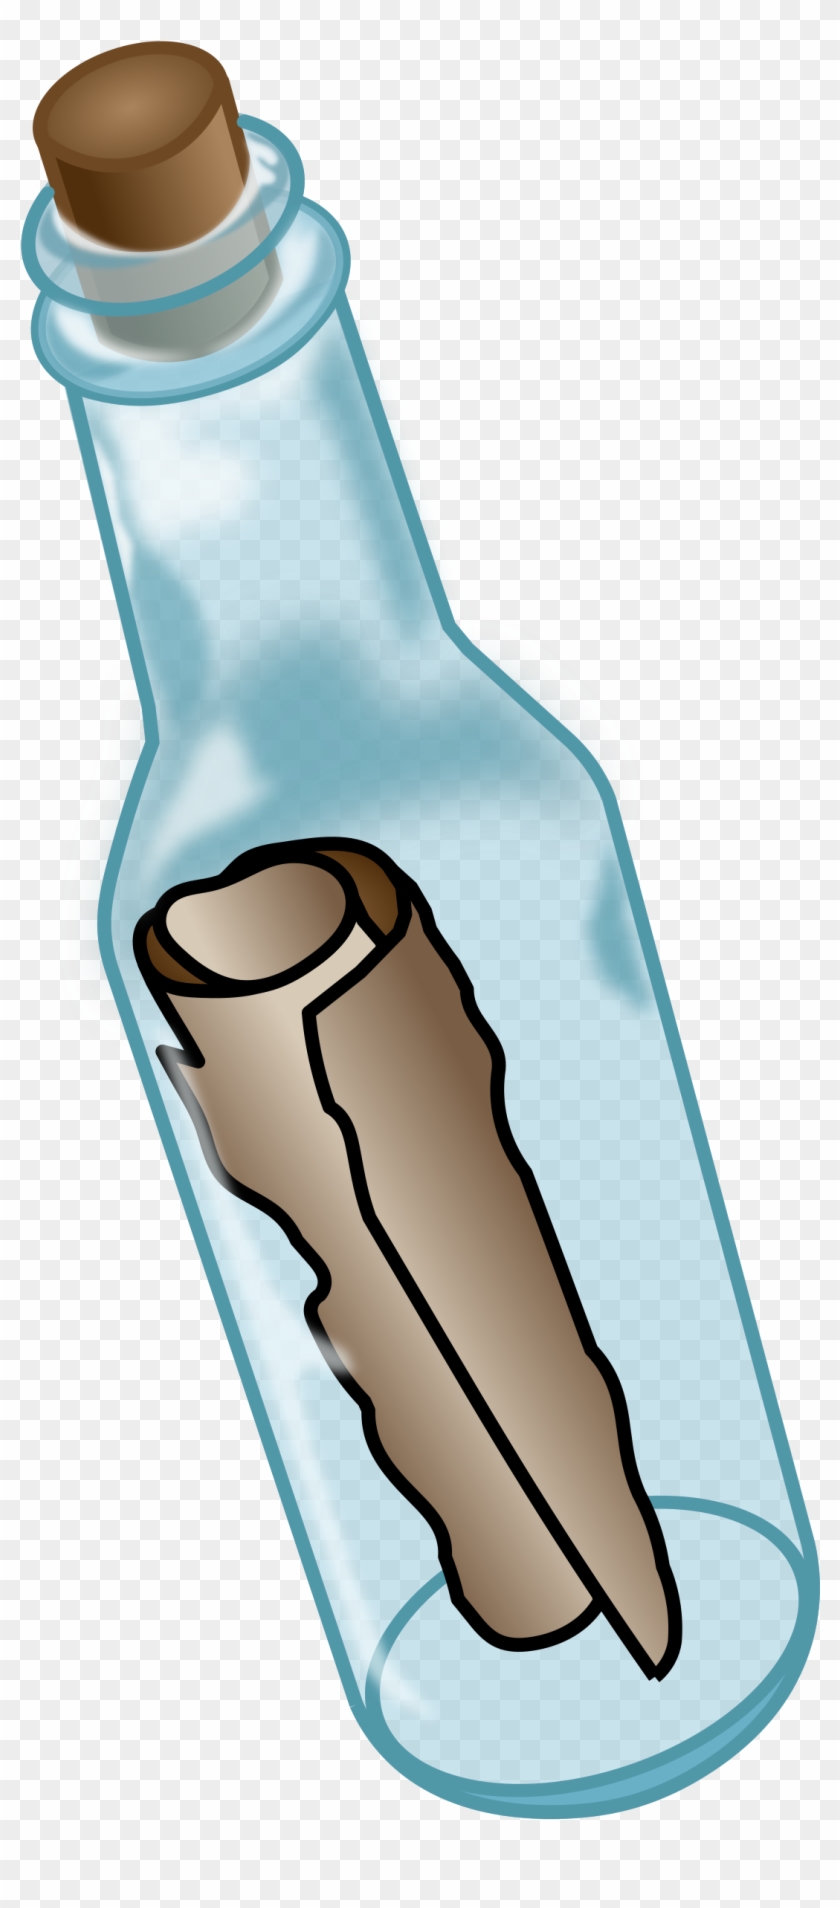 Big Image - Message In A Bottle Clipart #523908